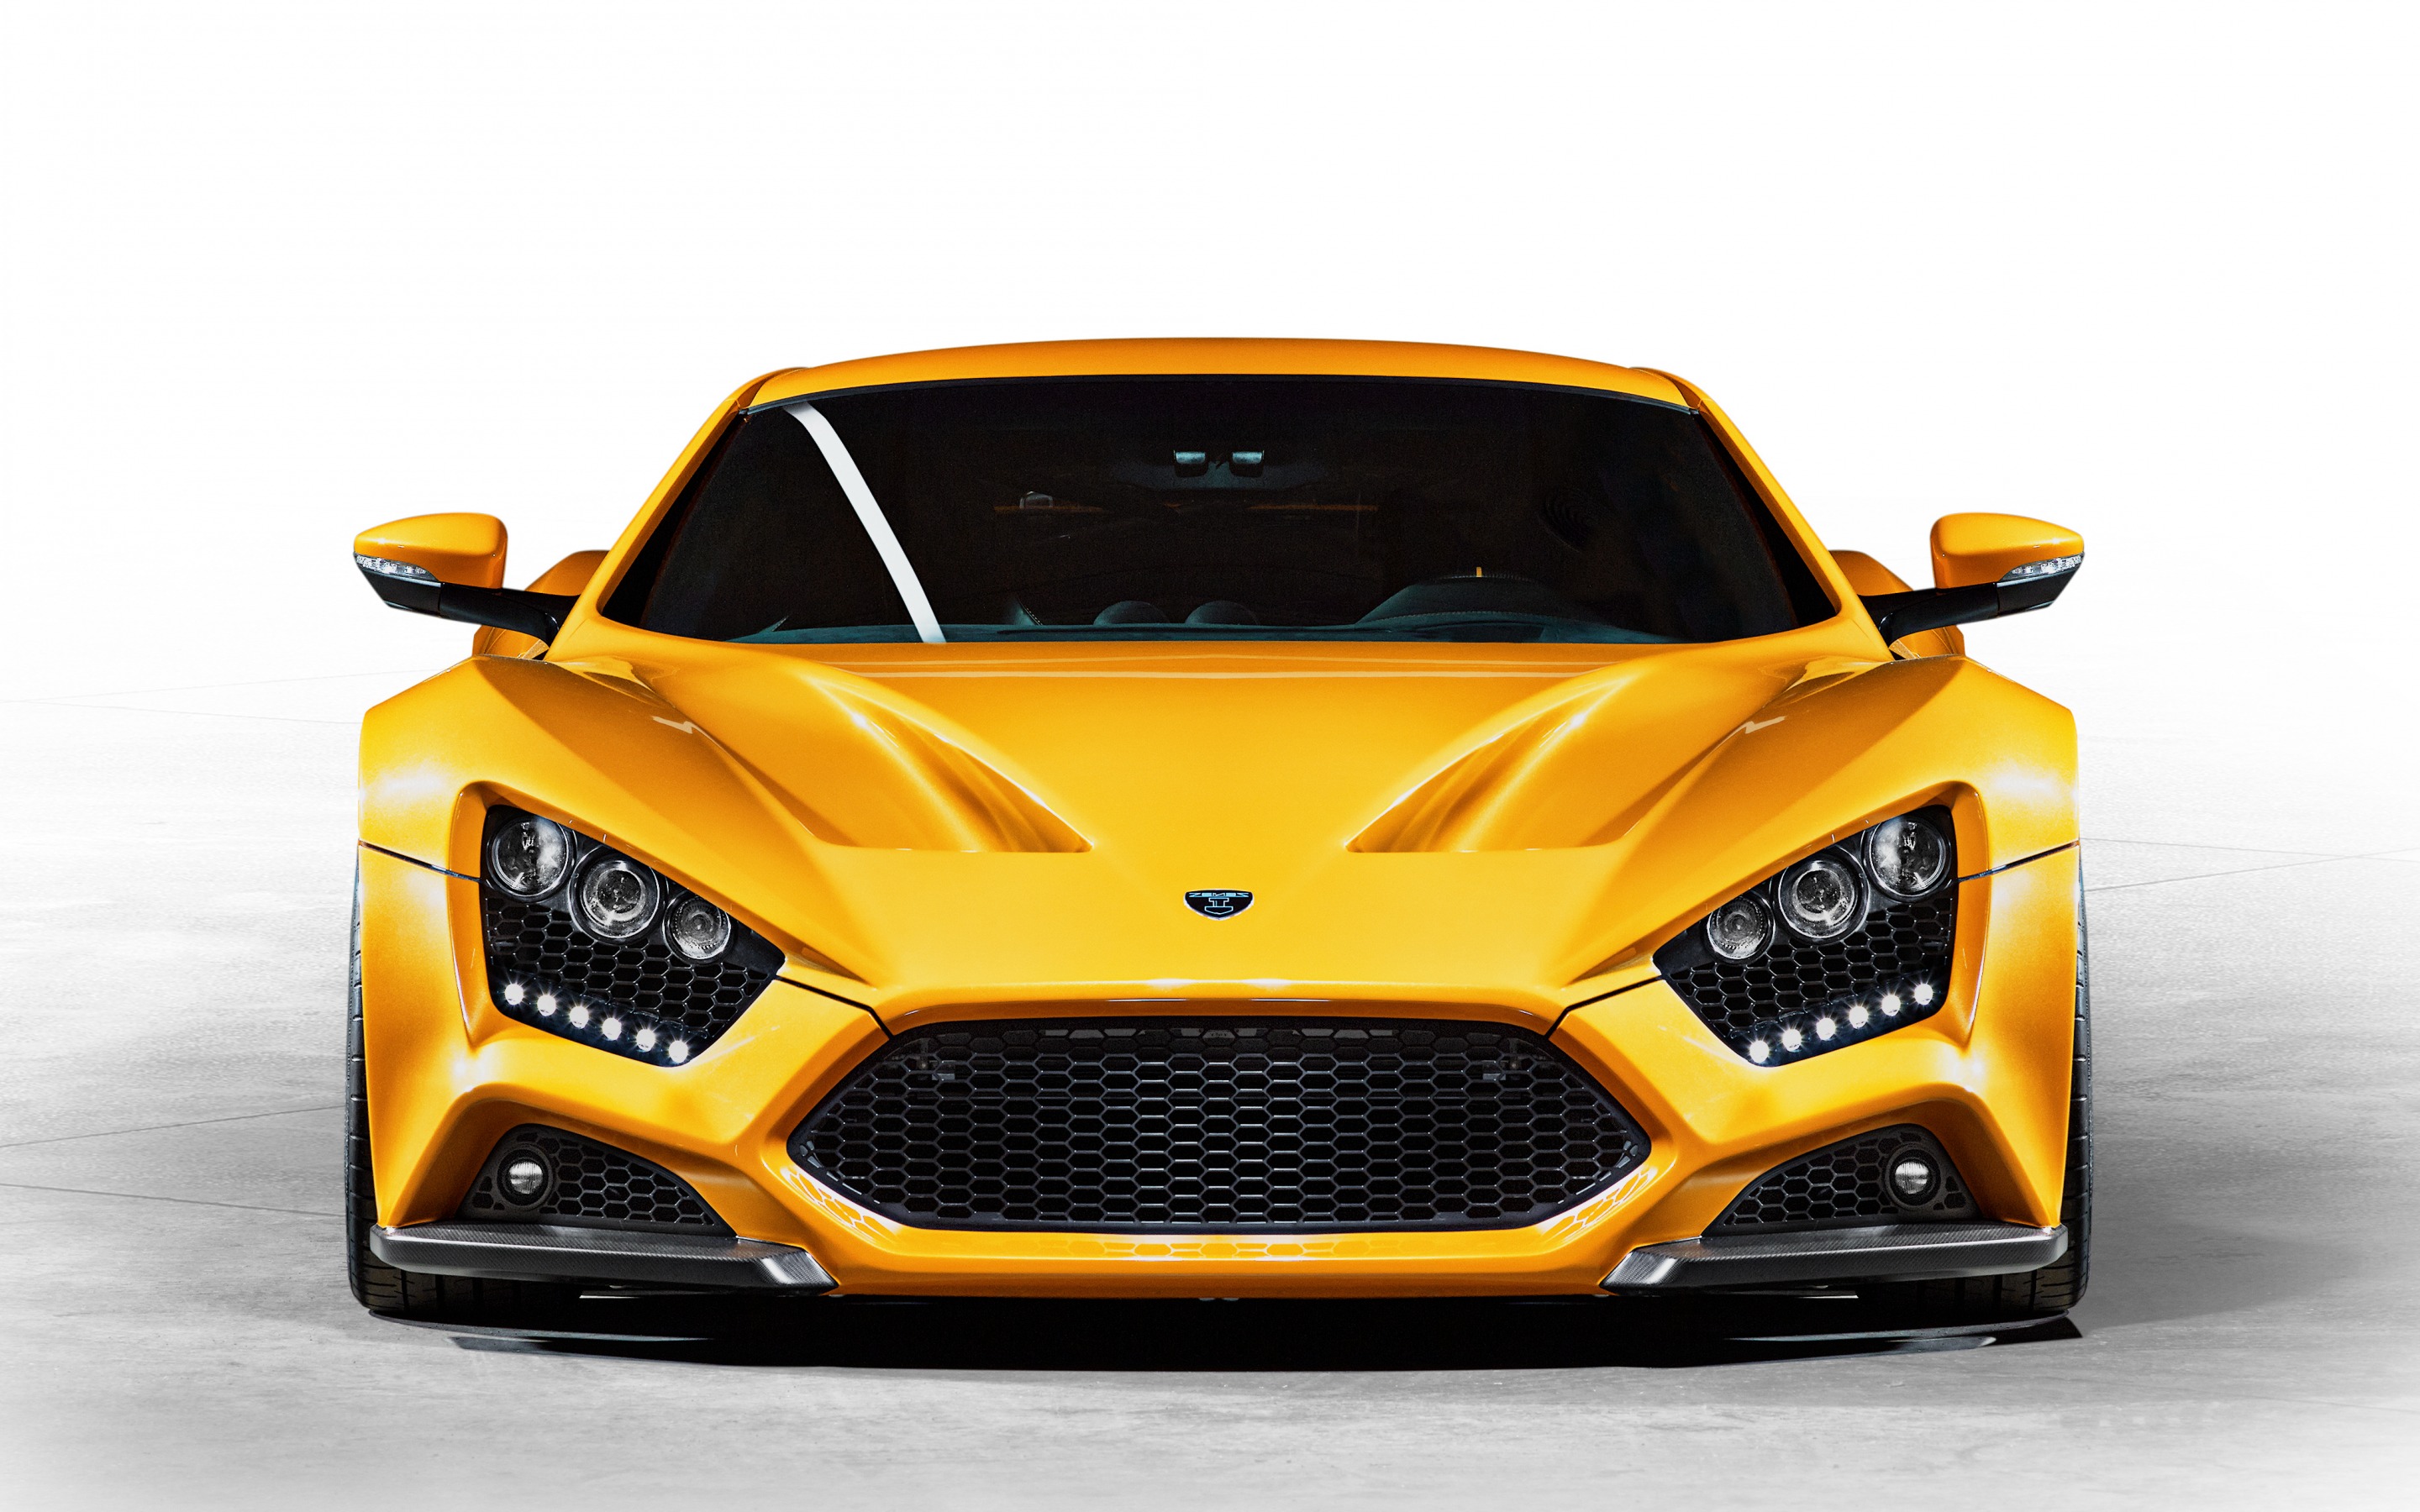 cars, yellow, front view, zenvo, st1 lock screen backgrounds